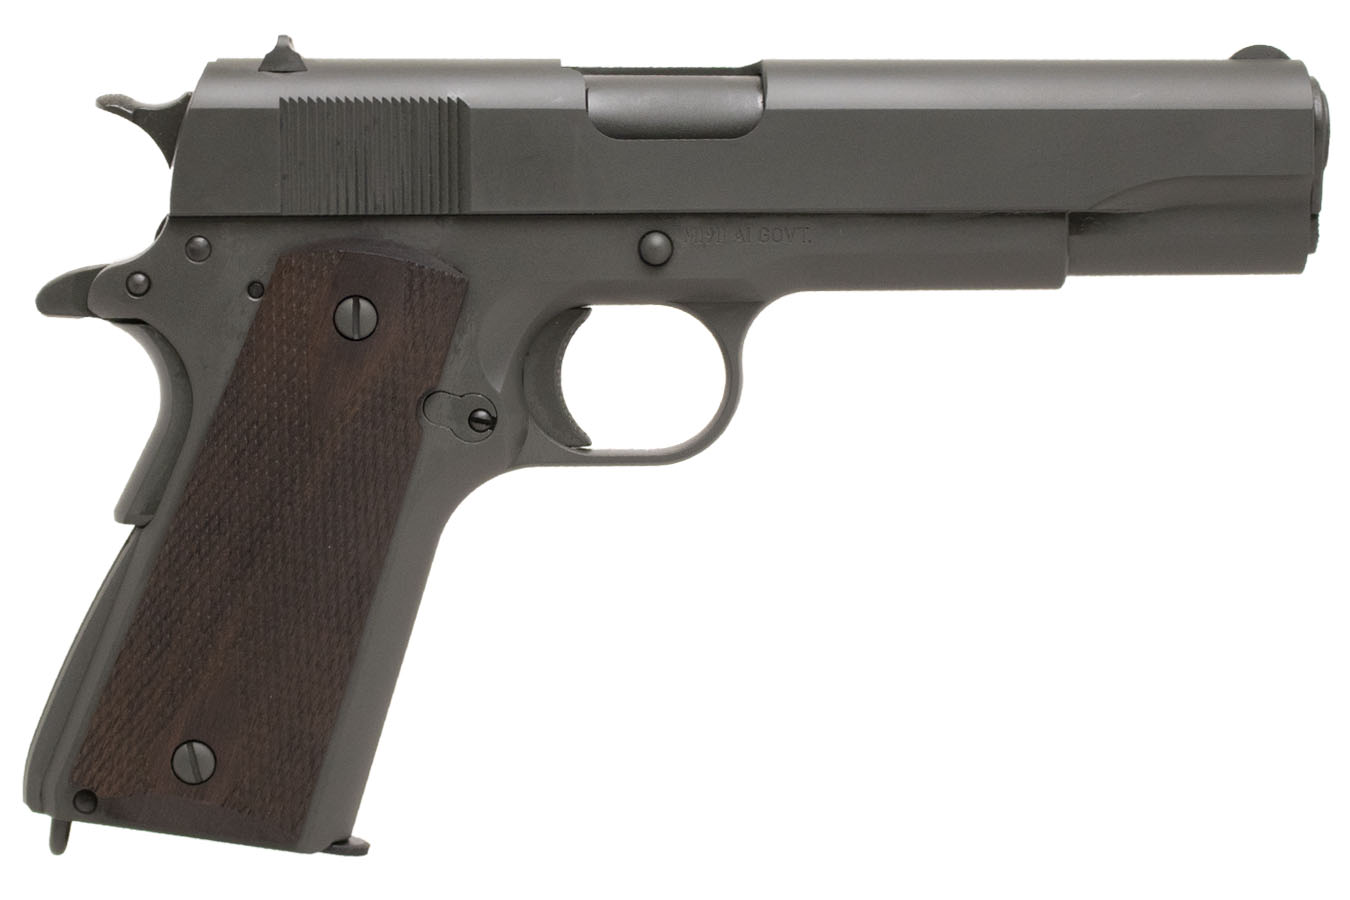 No. 18 Best Selling: TISAS 1911 GOVERNMENT 45 ACP 5 IN BBL PARKERIZED FINISH